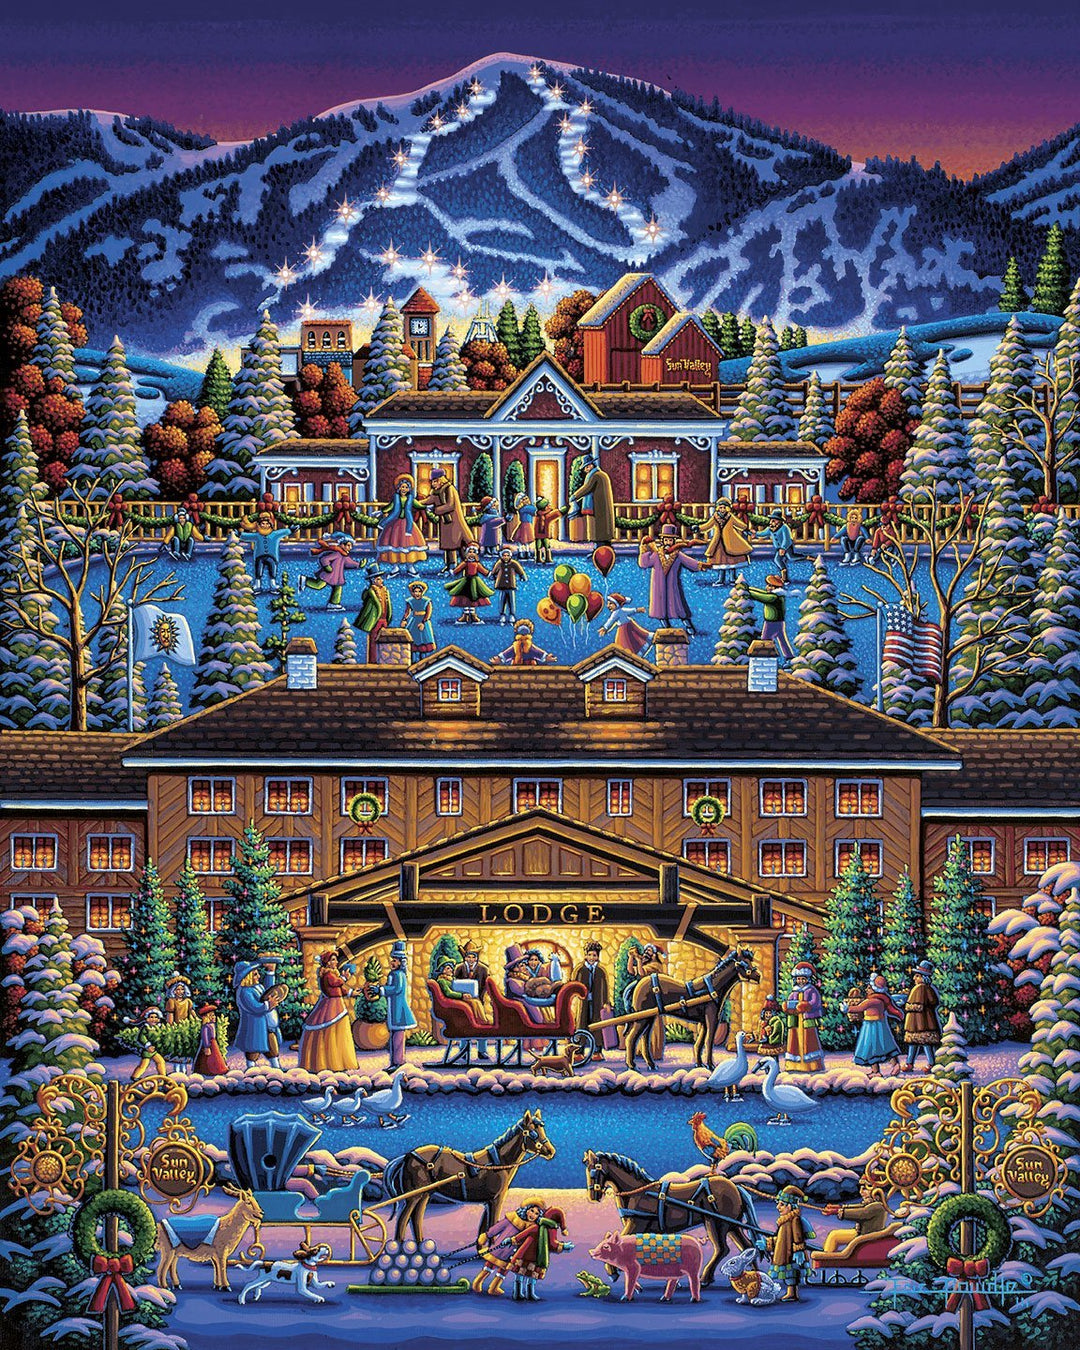 Sun Valley Holiday - Mini Puzzle - 250 Piece